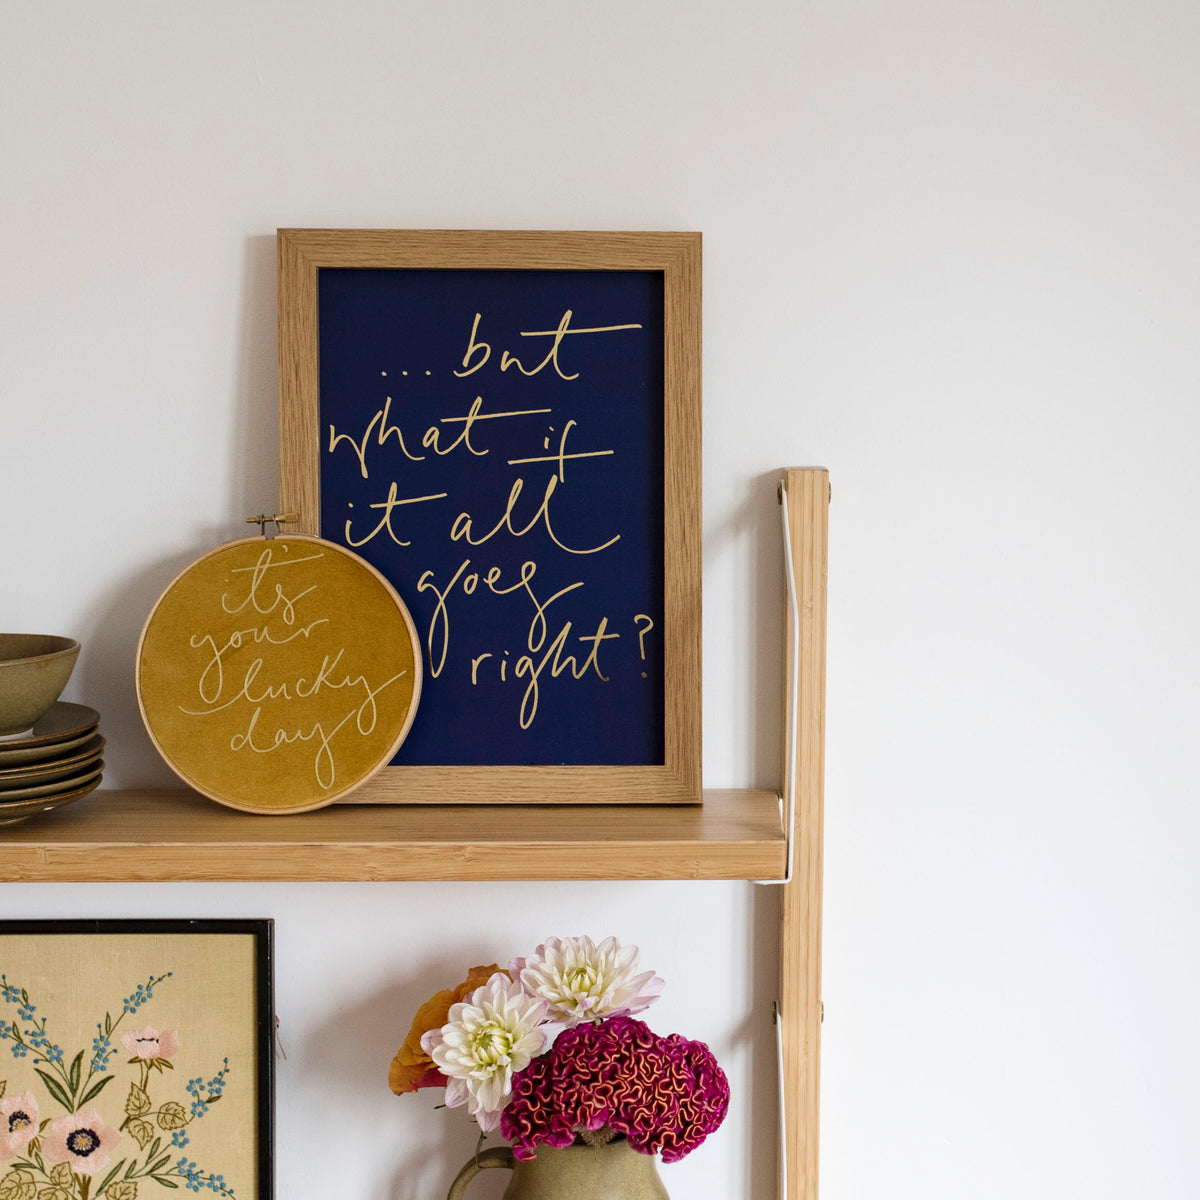 Dark Blue + Gold Foil '...but what if it all goes right?' Print